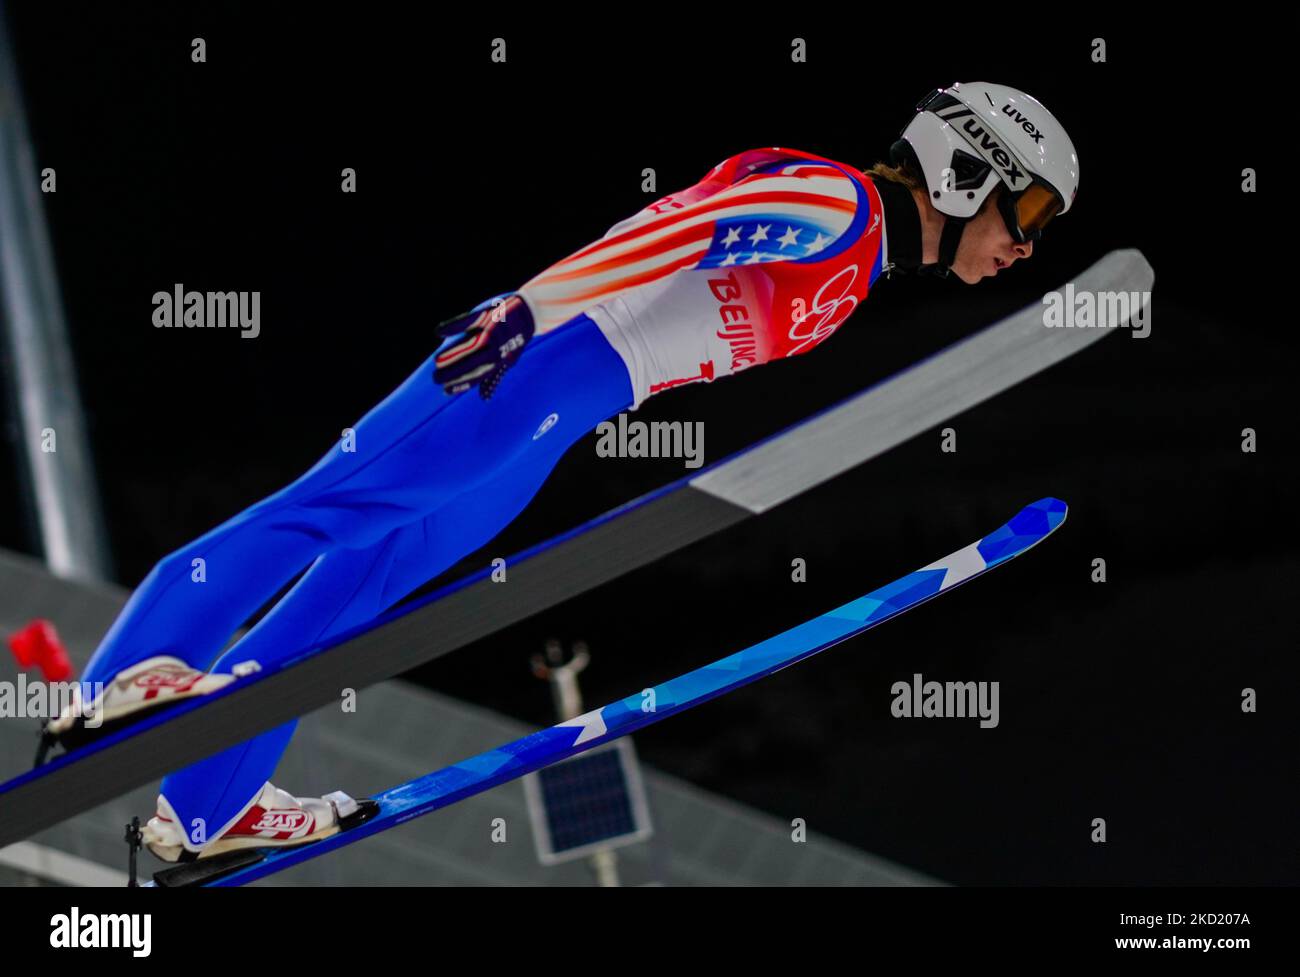 Gasienica Patrick from USA during Ski Jumping at the Beijing 2022 Winter Olympic Games at Zhangjiakou Genting Snow Park on February 6, 2022 in Zhangjiakou, China. (Photo by Ulrik Pedersen/NurPhoto) Stock Photo